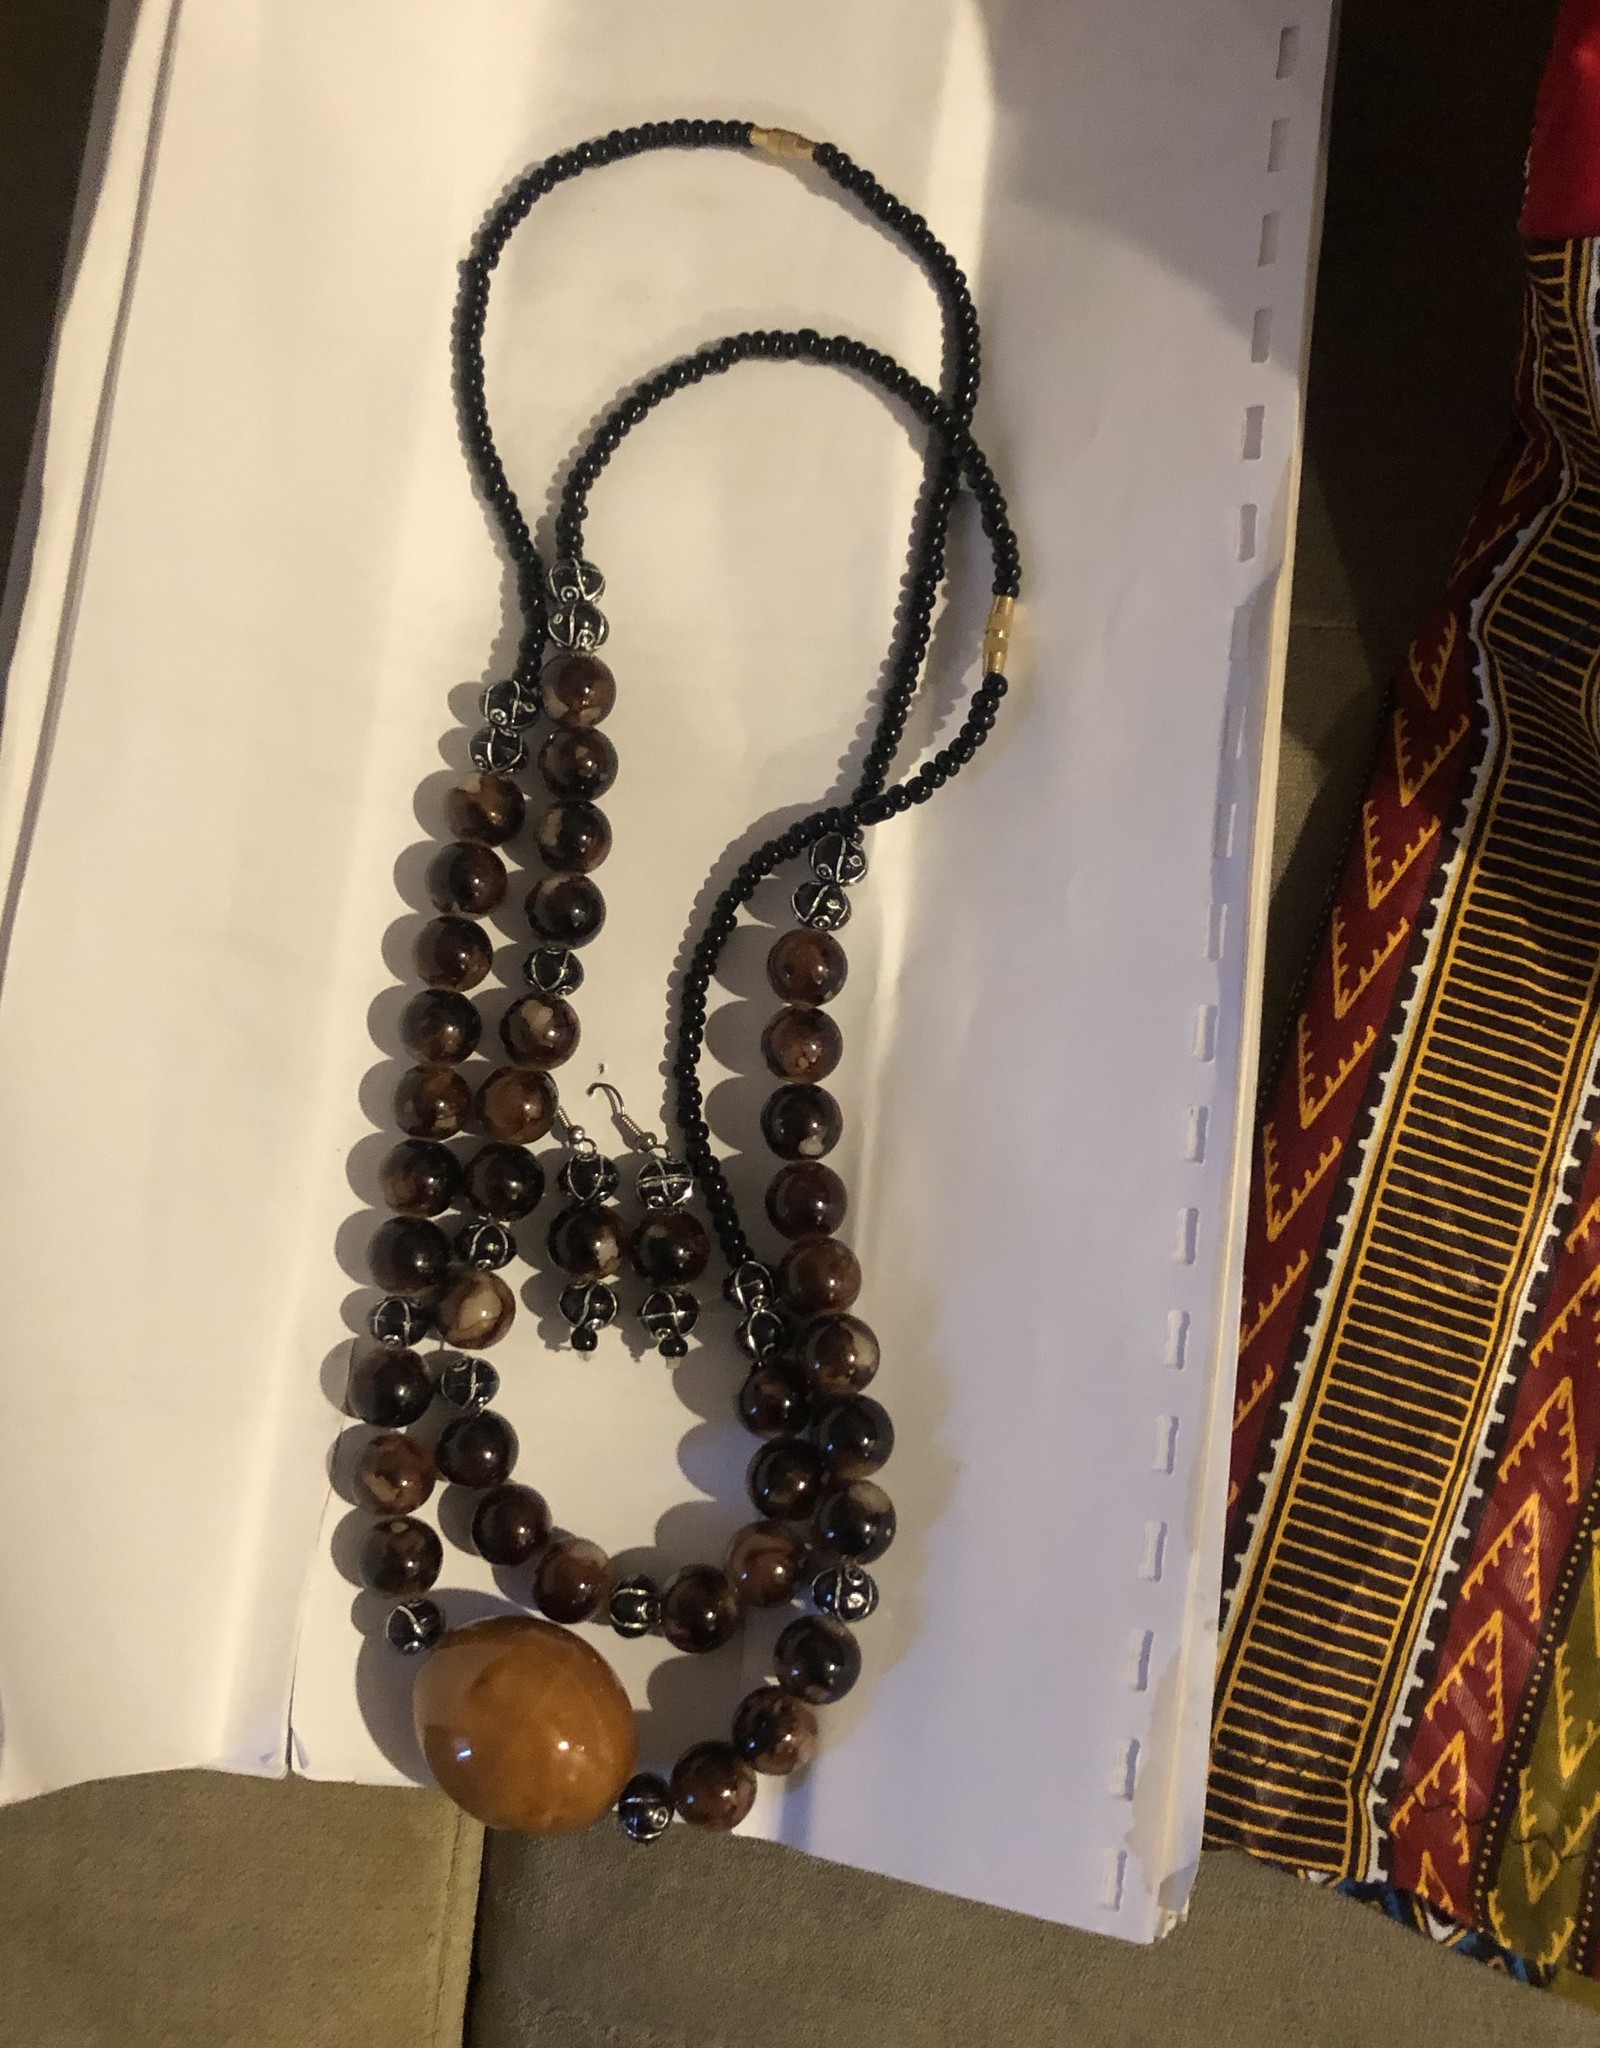 Double Beaded Brown Necklace with earrings to match